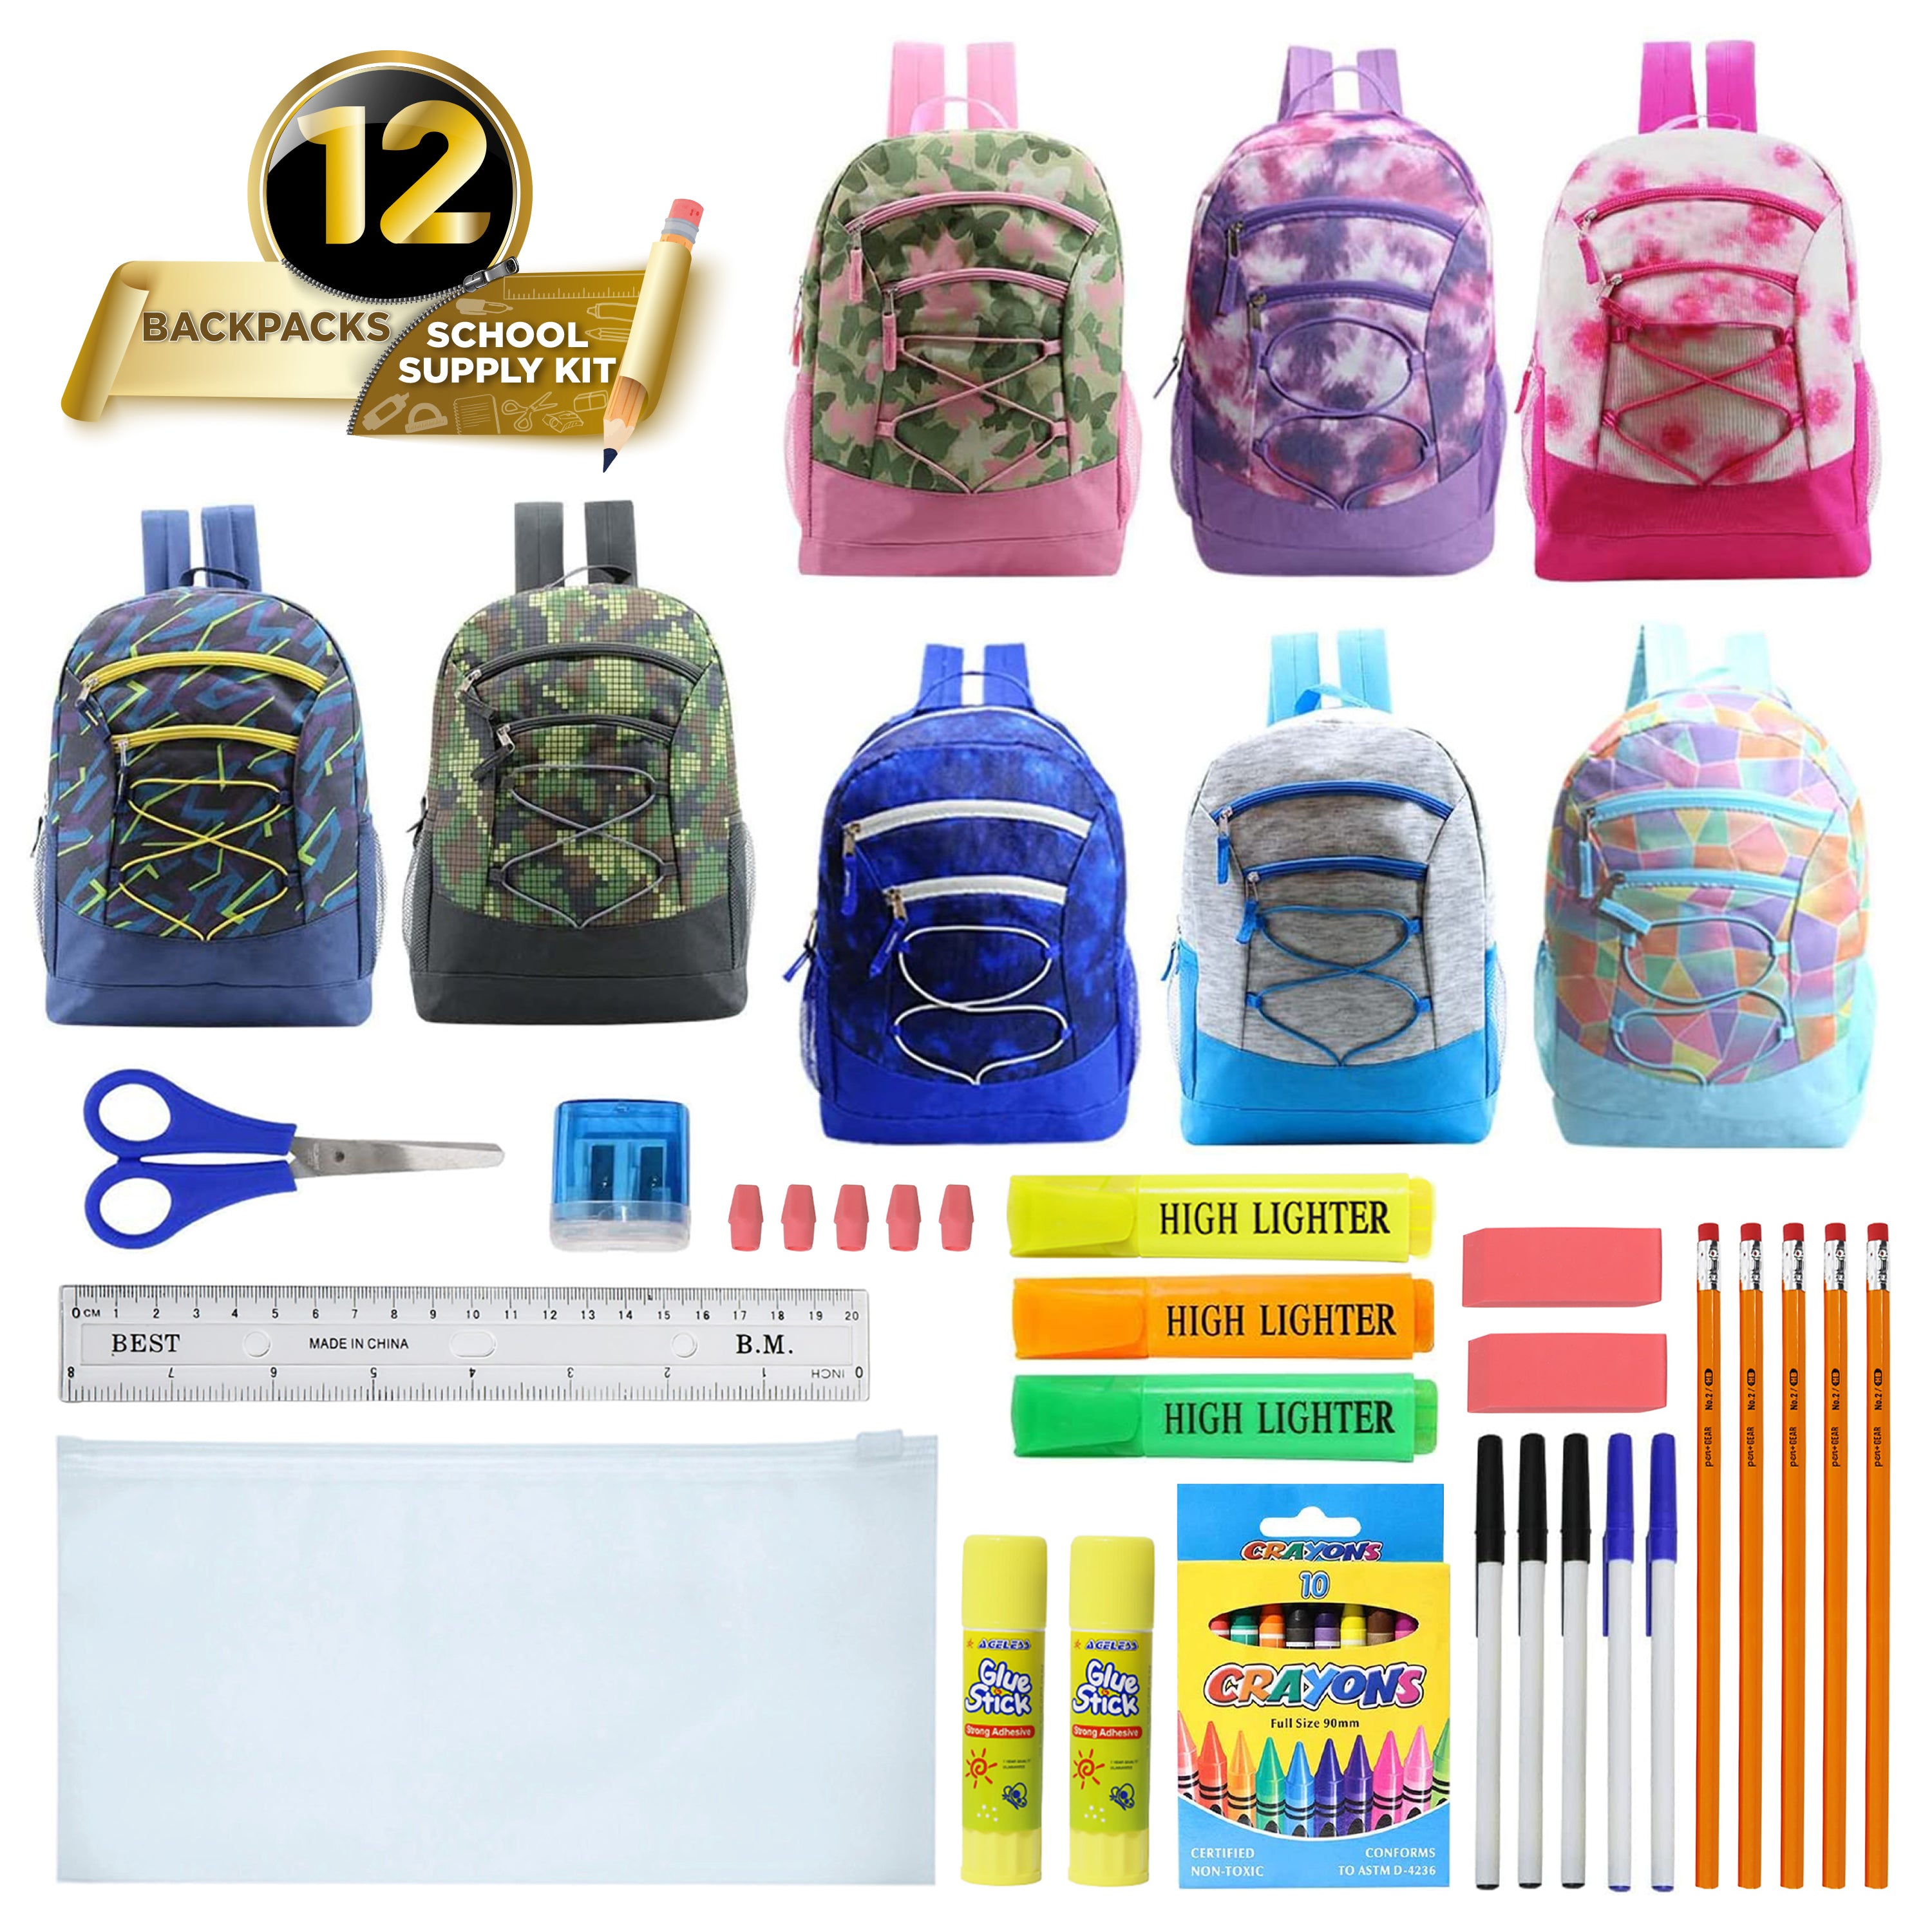 17 Inch Bulk Backpacks in Assorted Prints with School Supply Kits Wholesale - Kit of 12